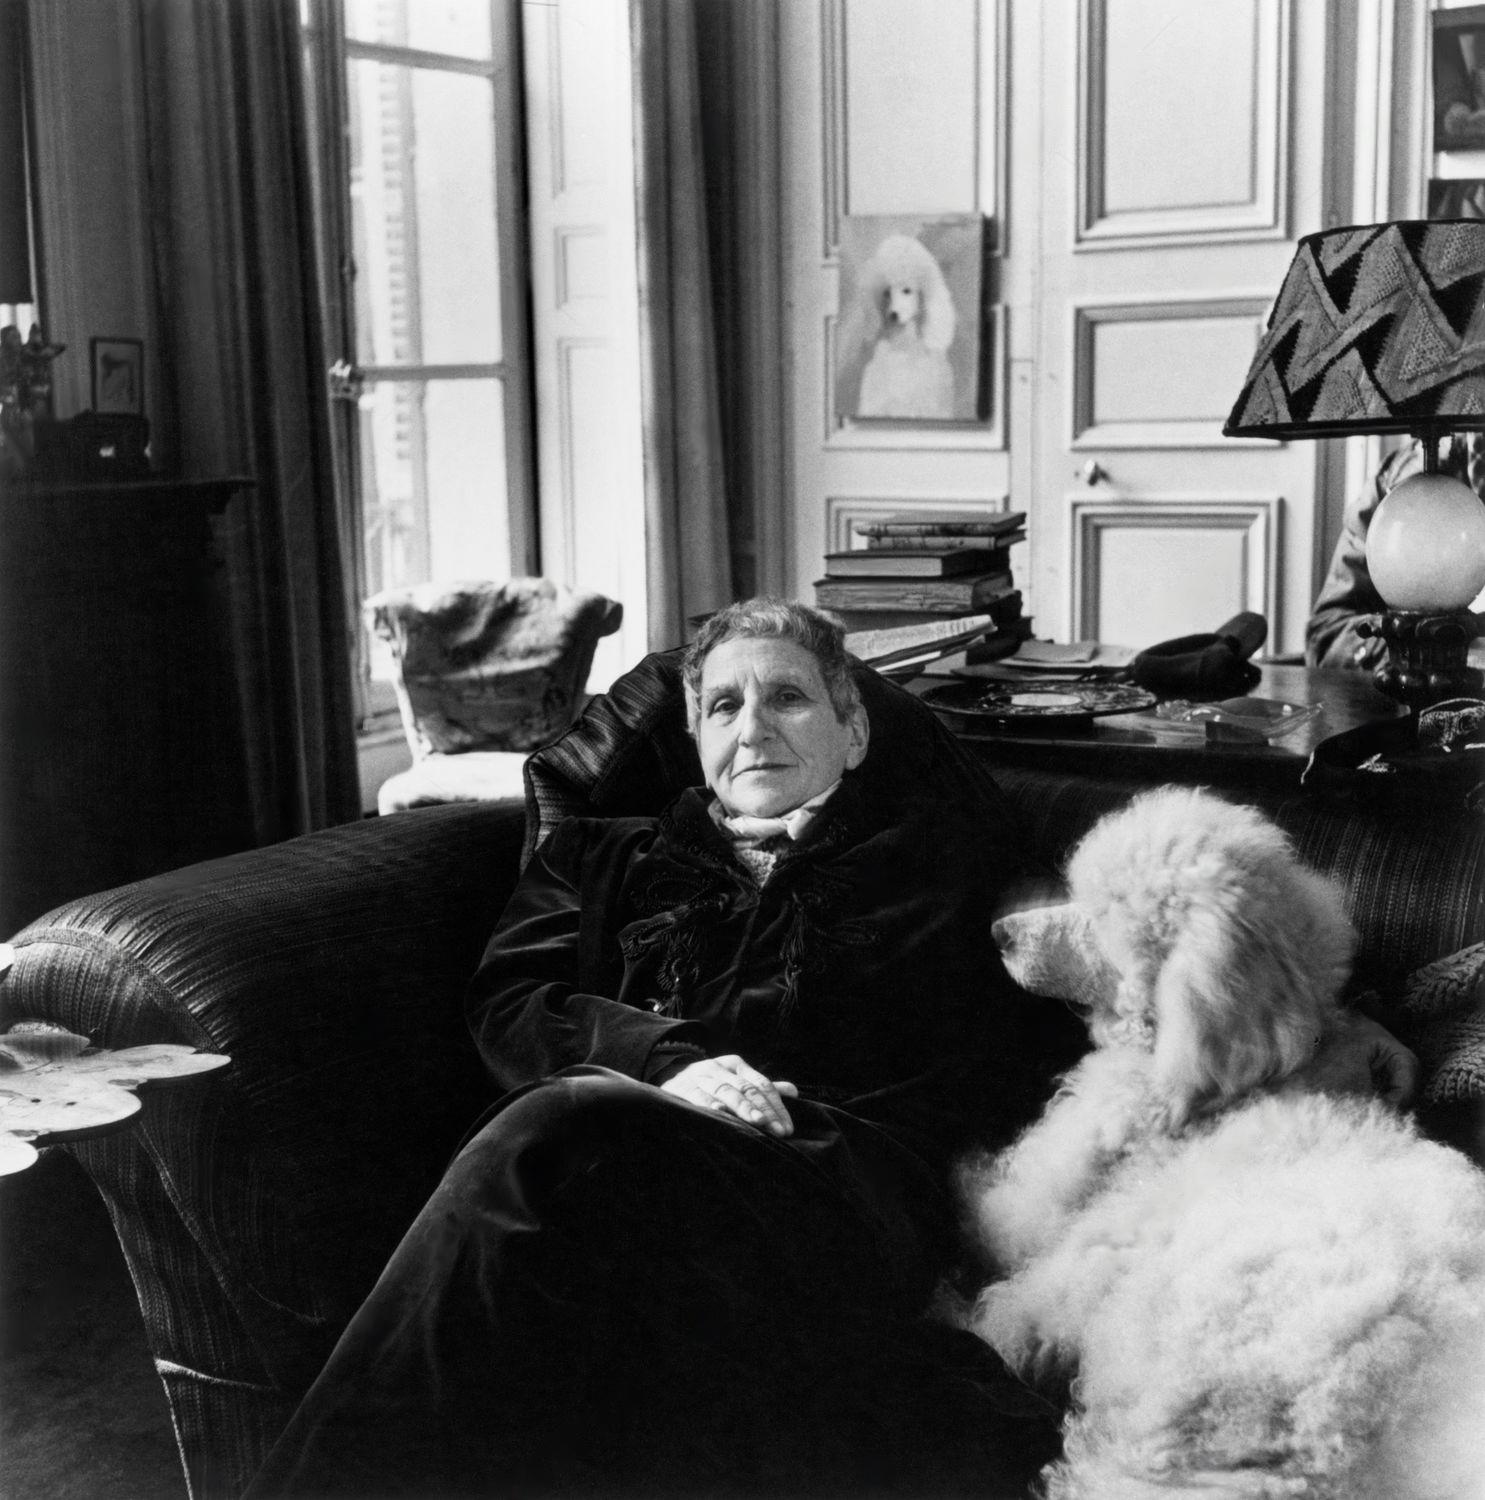 Gertrude Stein with Basket, Paris - Photograph by Horst P. Horst